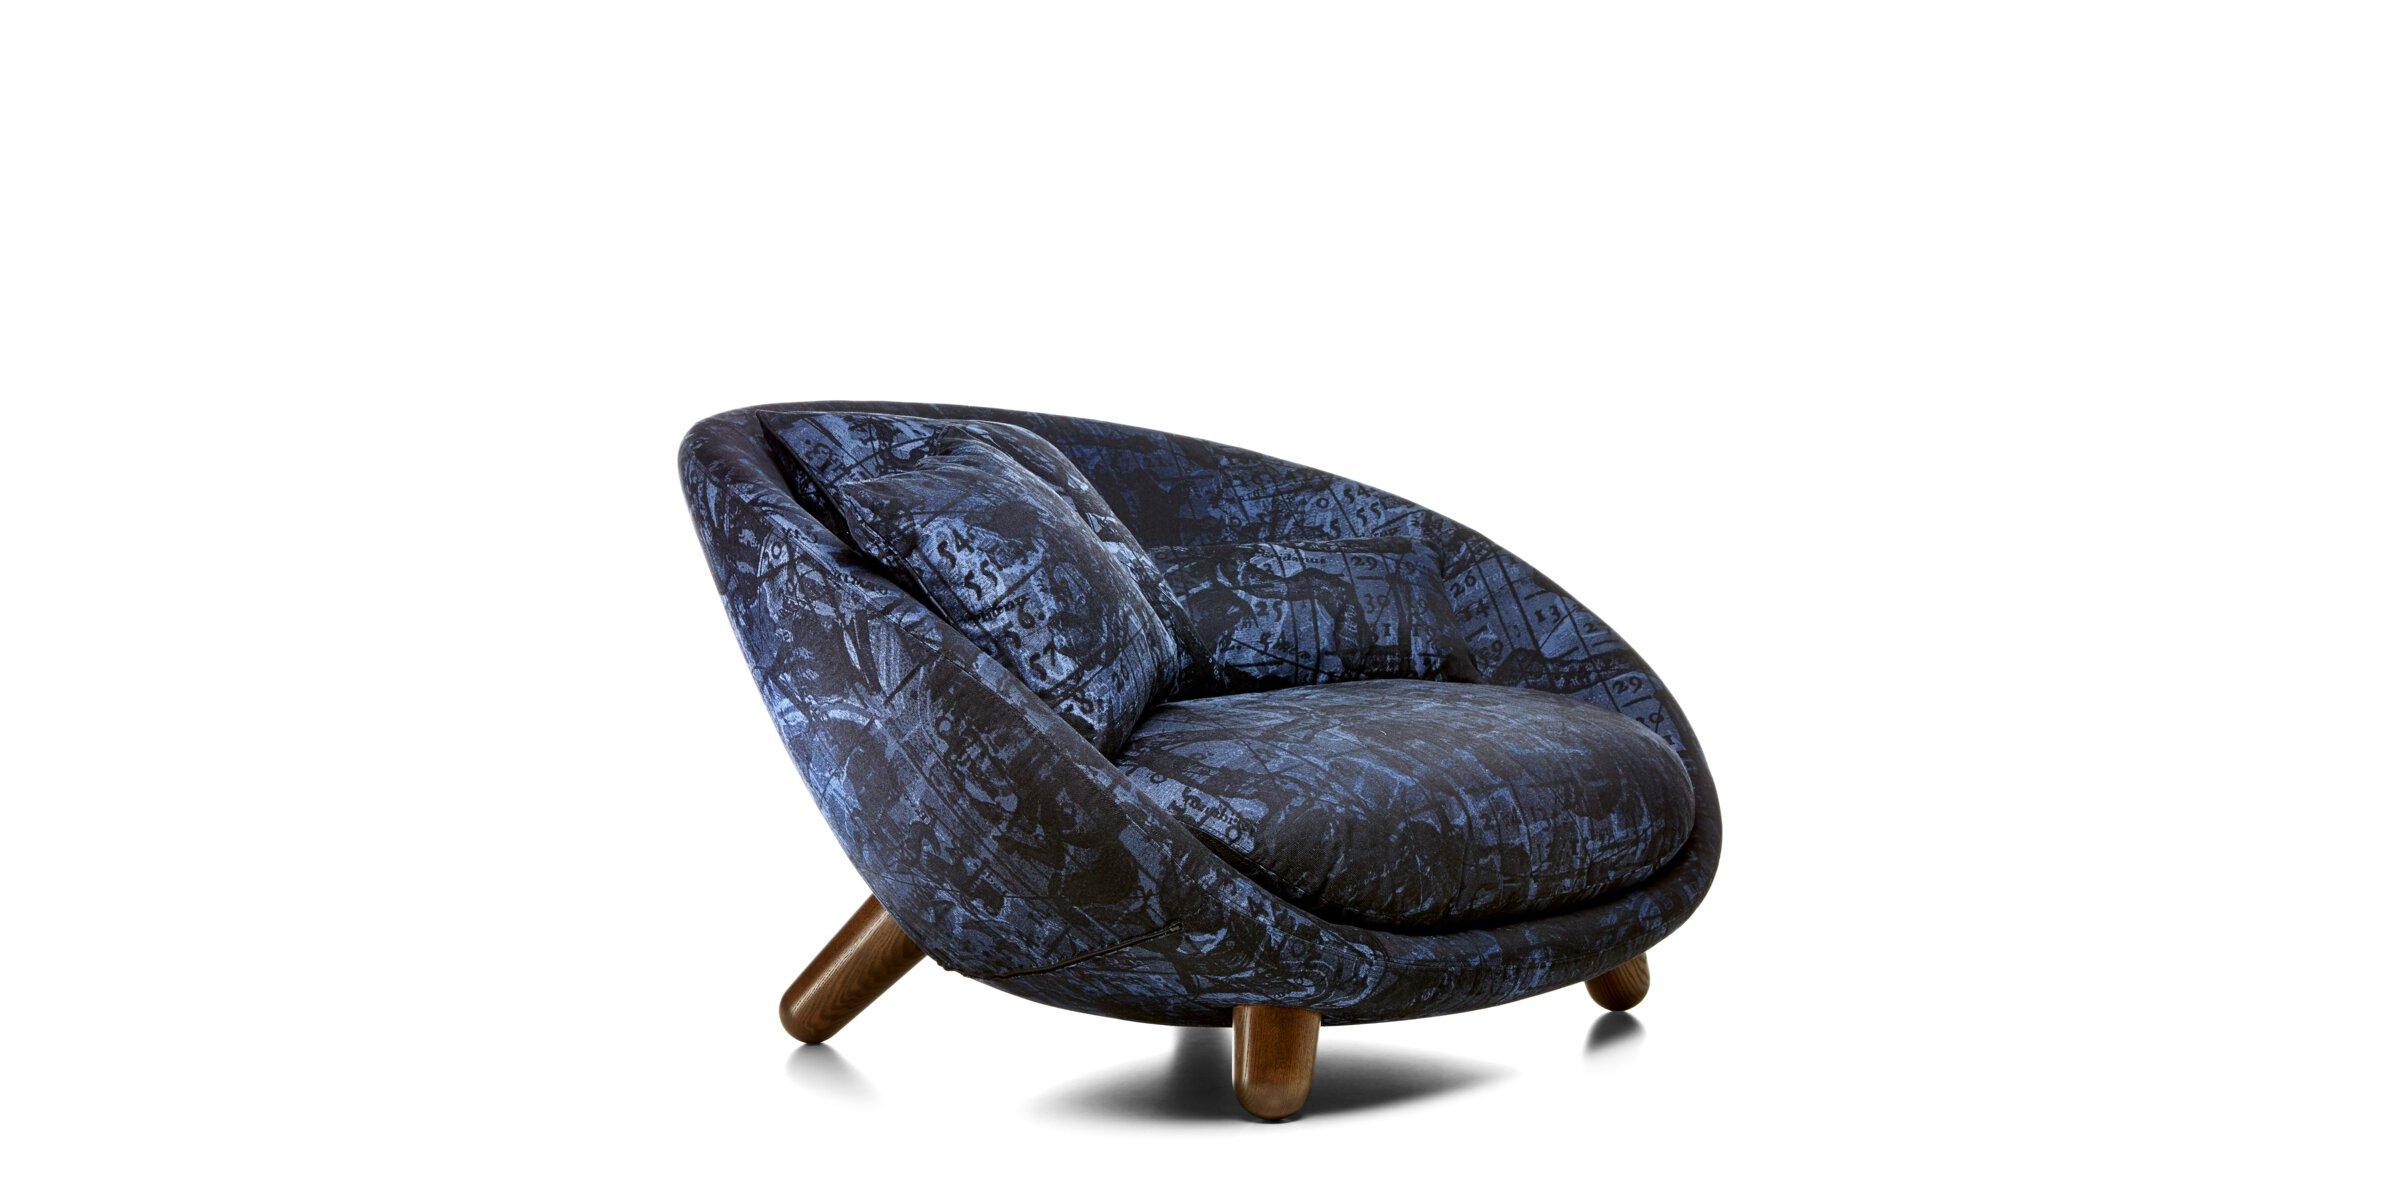 Have you ever fallen in love with a chair or on a sofa? Both experiences are possible, even probable while enjoying a romantic dinner for two in the Love chair or cuddling up with your sweetheart in one of the Love sofas by Marcel Wanders. True love